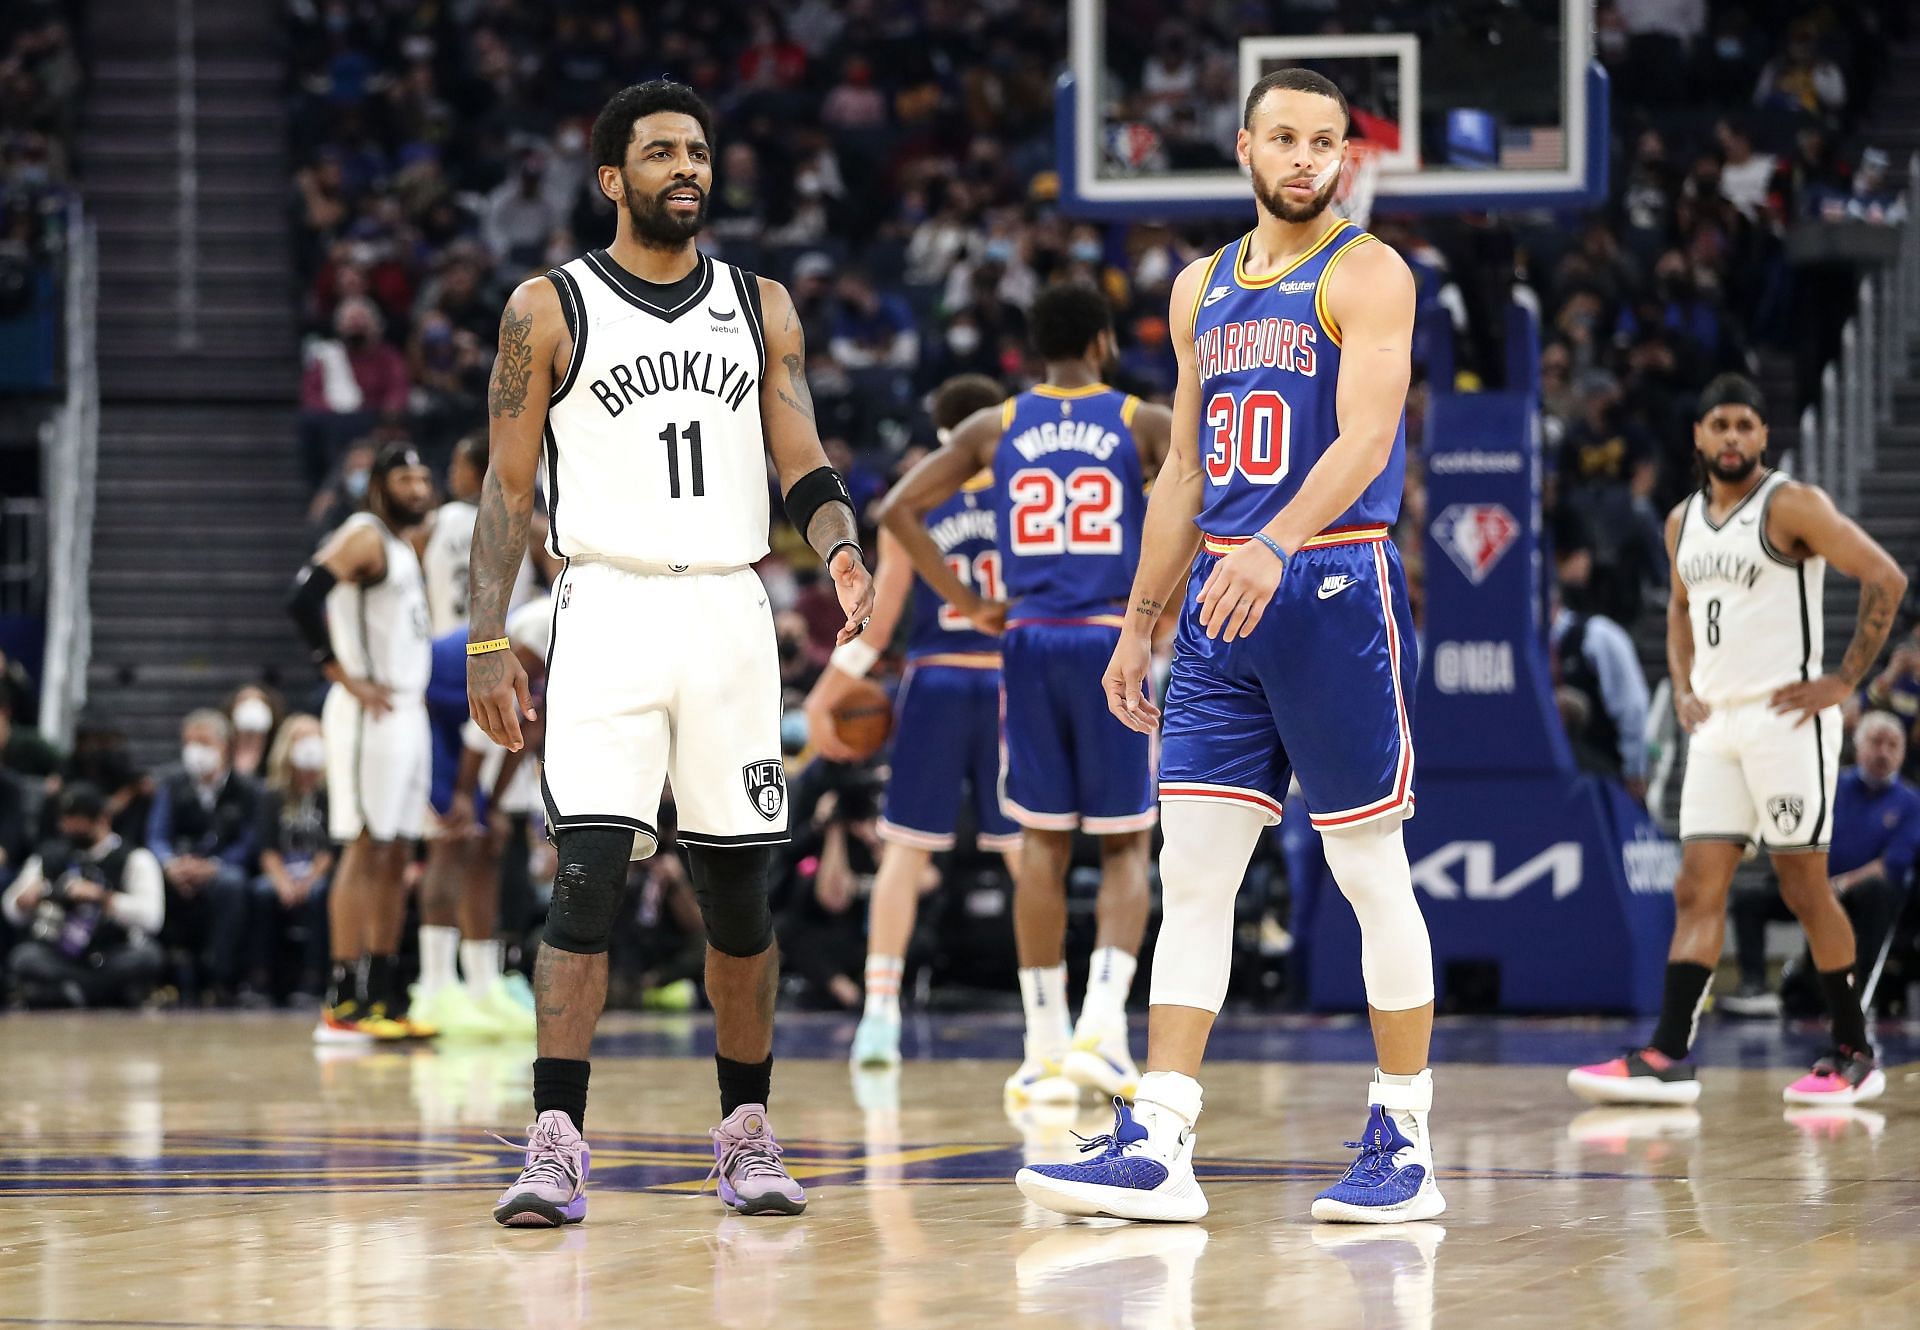 Stephen Curry of the Golden State Warriors and Kyrie Irving of the Brooklyn Nets